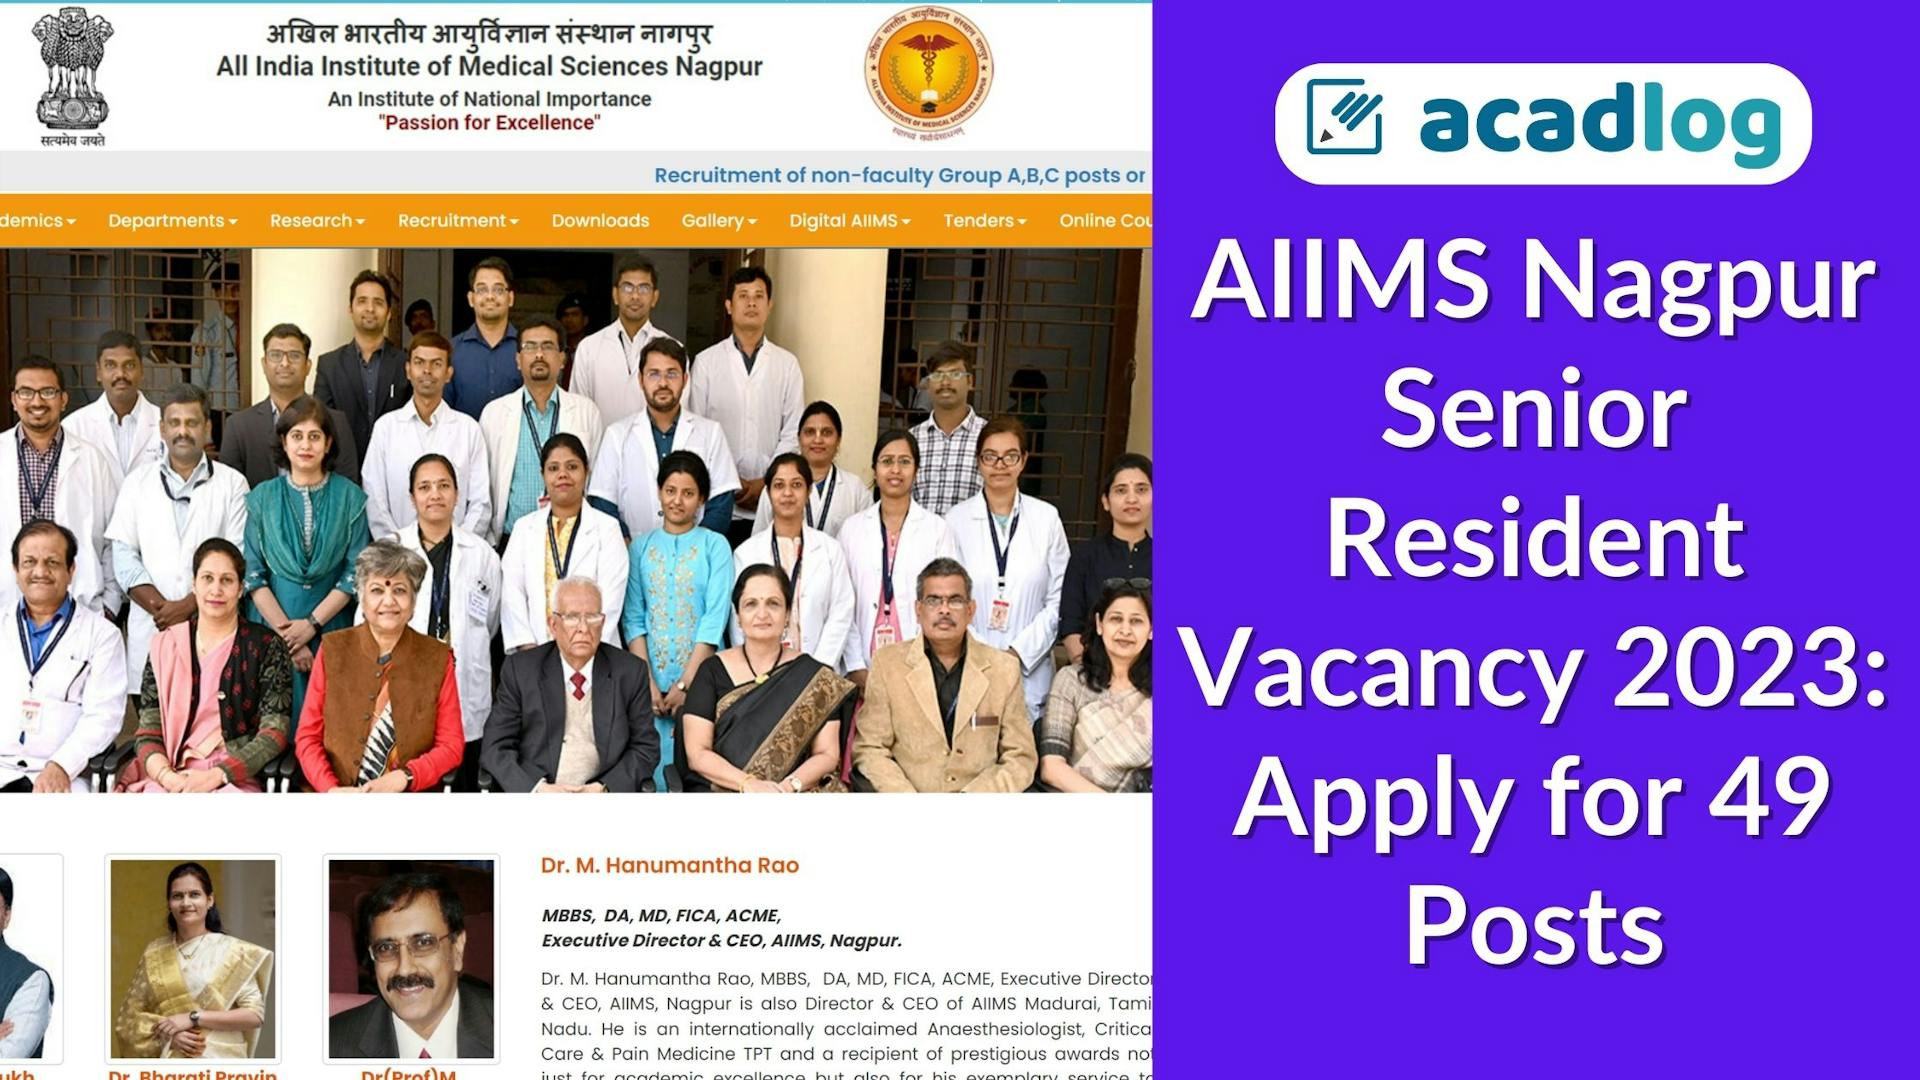 AIIMS Nagpur Senior Resident Vacancy 2023: Apply for 49 Posts